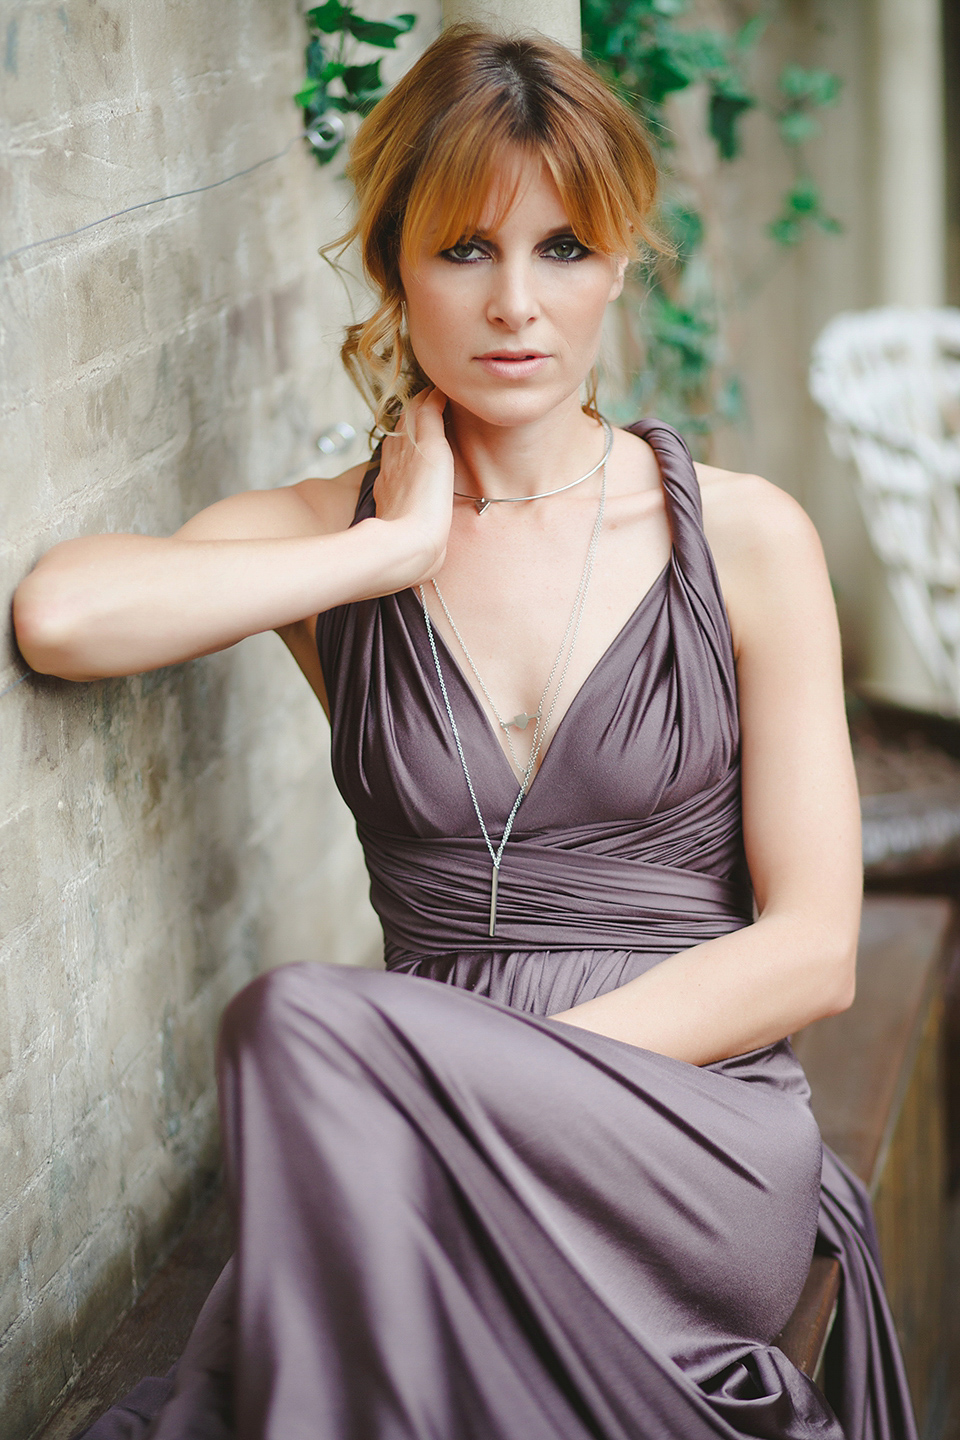 twobirds Bridesmaids - dresses designed to fit, compliment and flatter all body shapes.